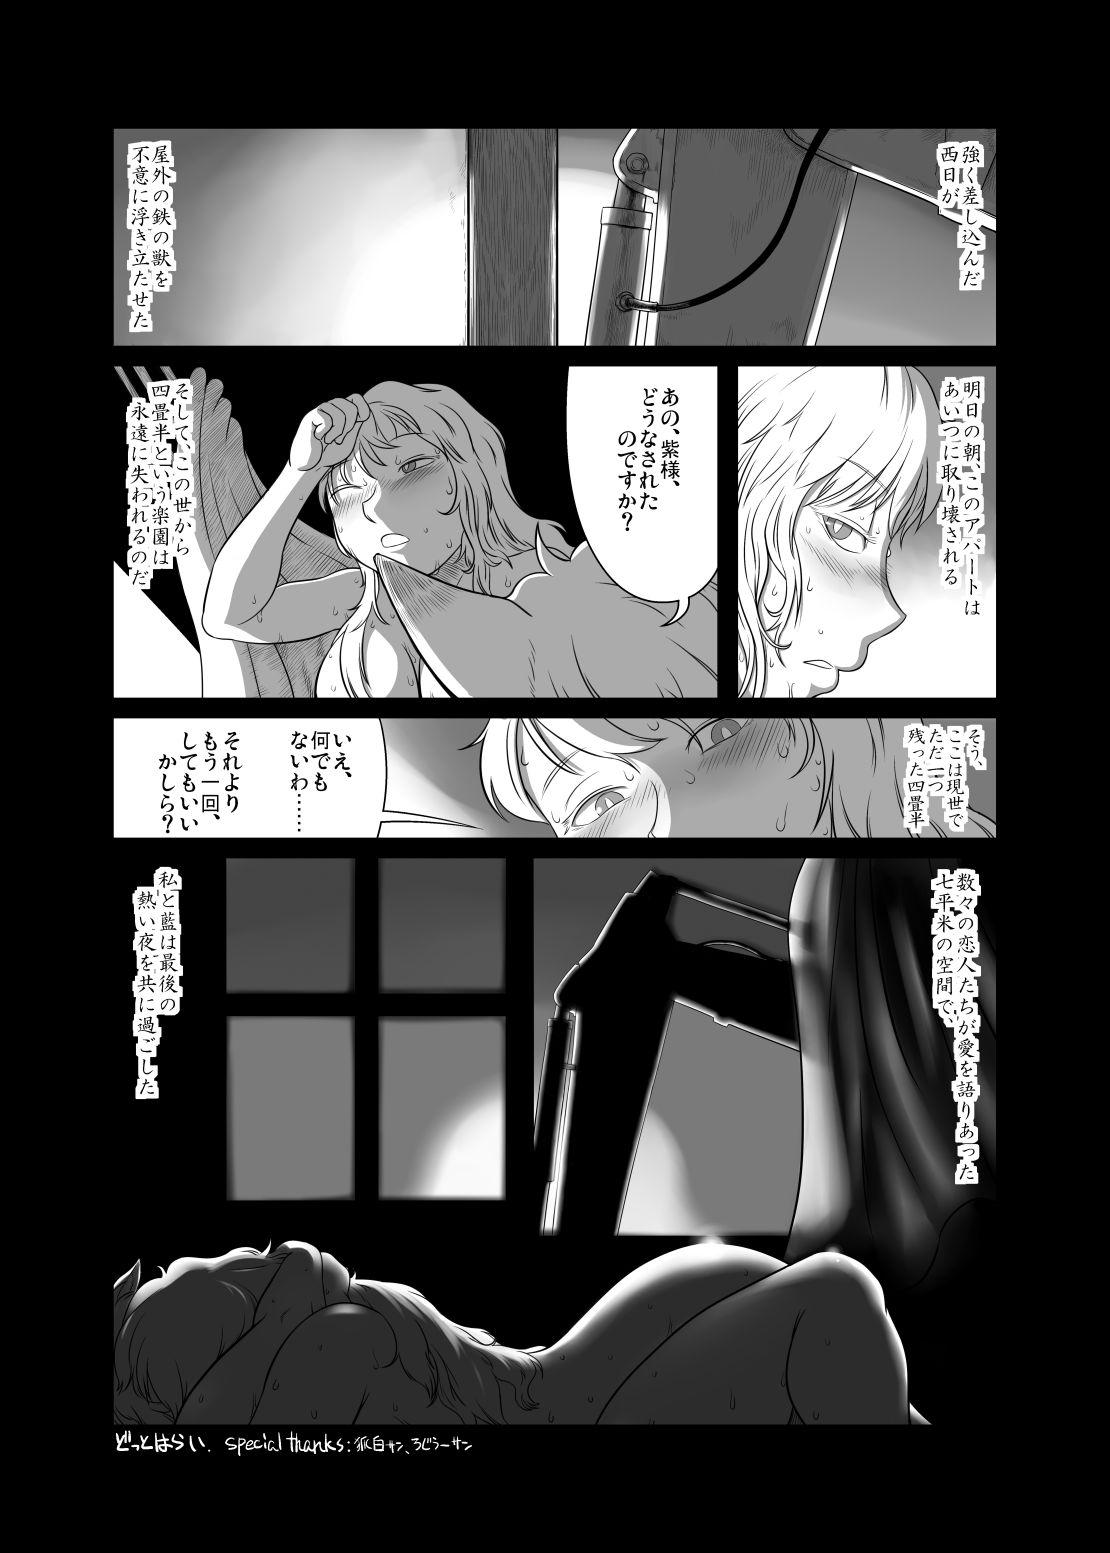 Cdzinha 四畳半幻想記 - Touhou project Old And Young - Page 11